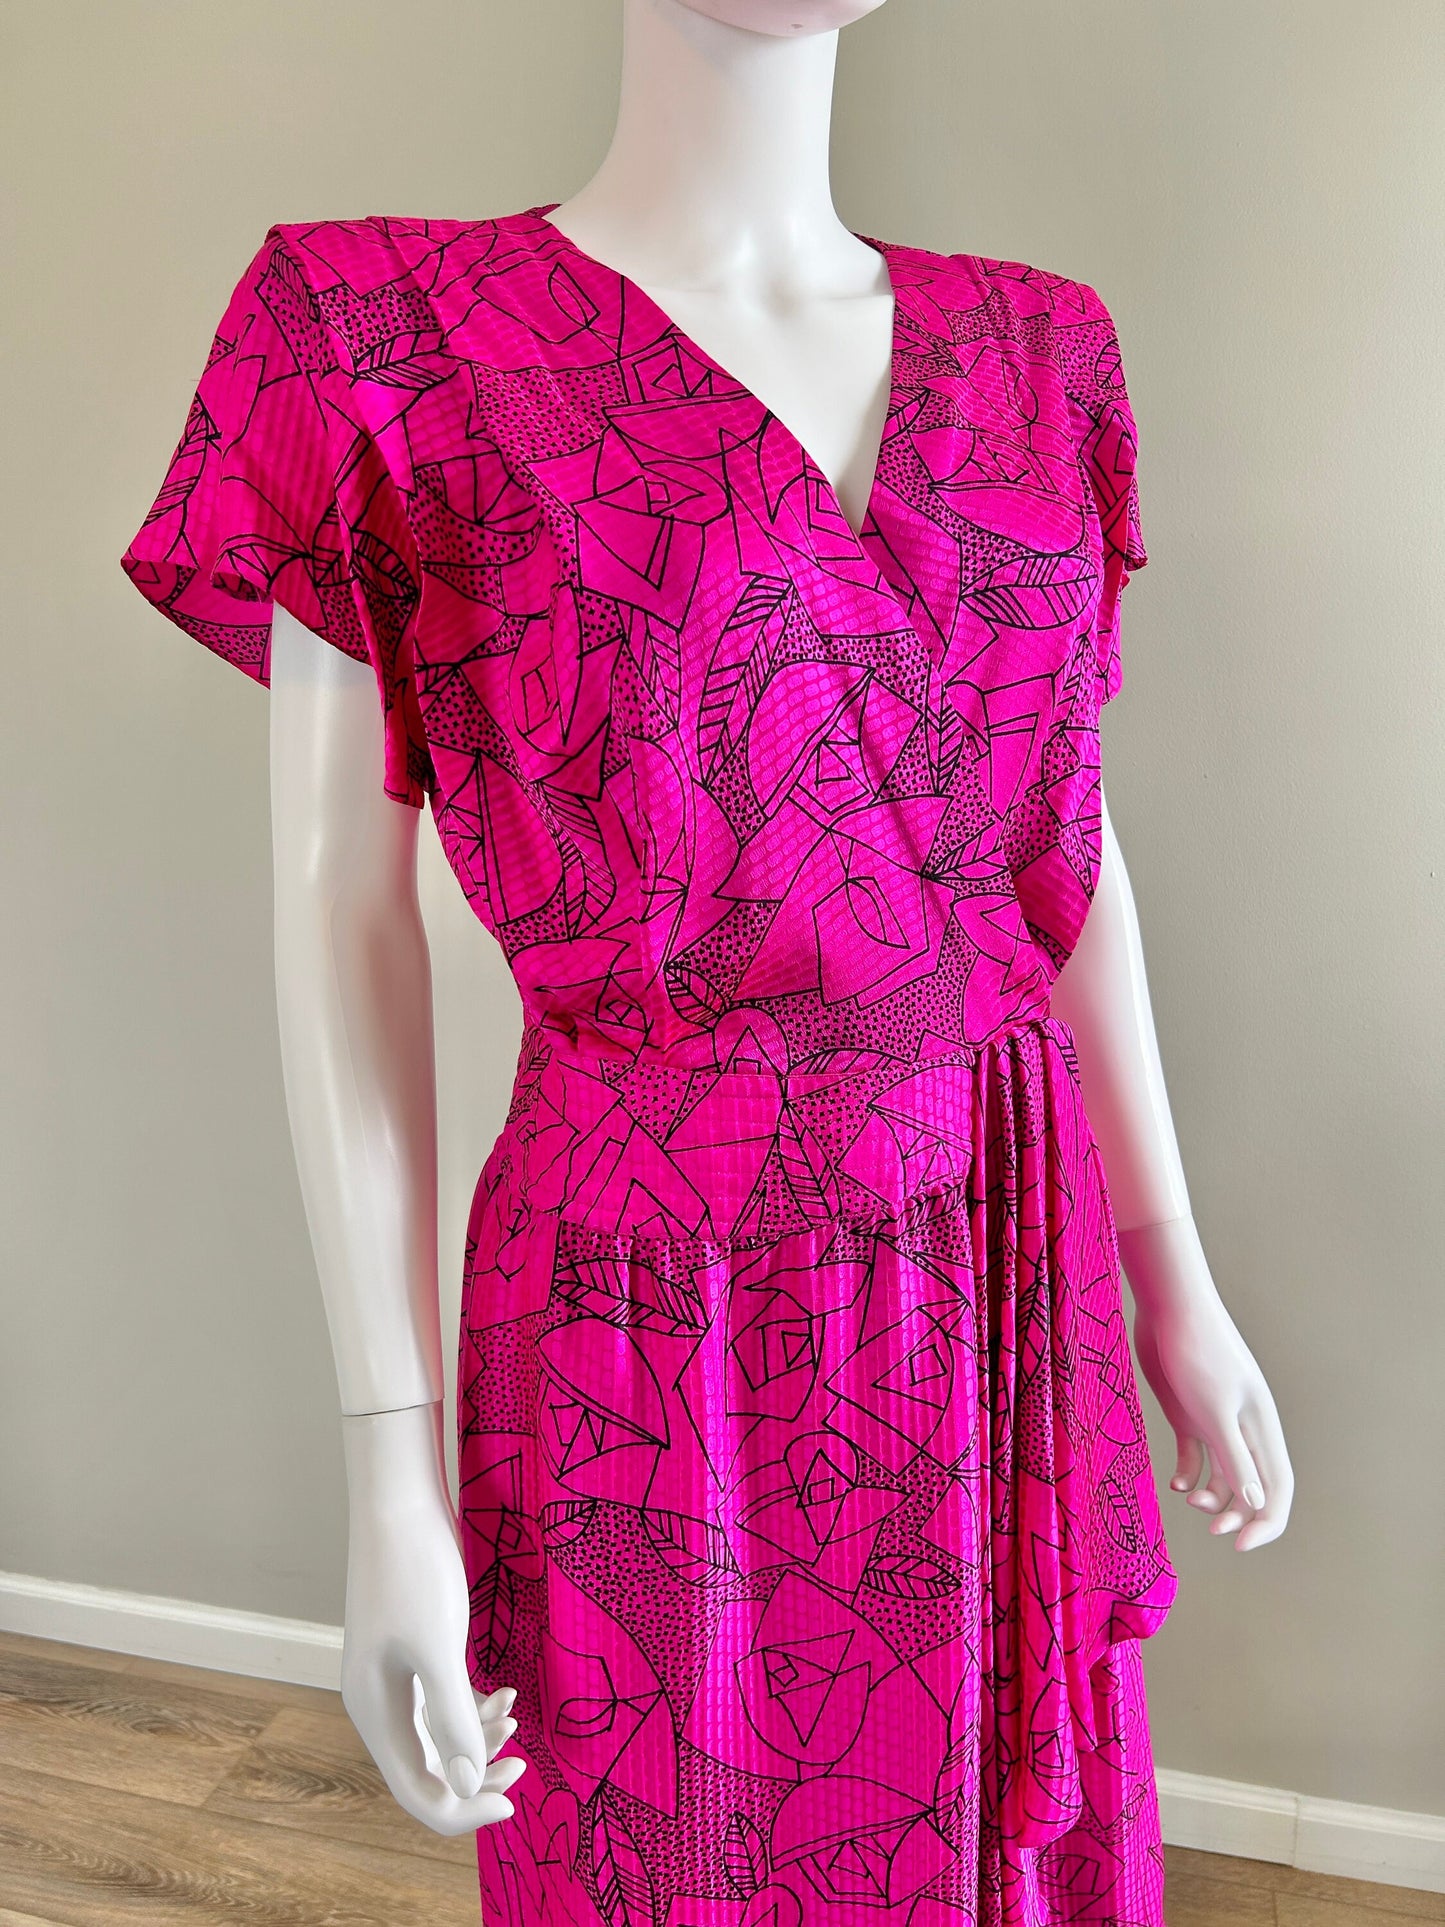 Vintage 1980s Norah Noh Wrap Dress / 80s hot pink silk abstract print dress / Size S M